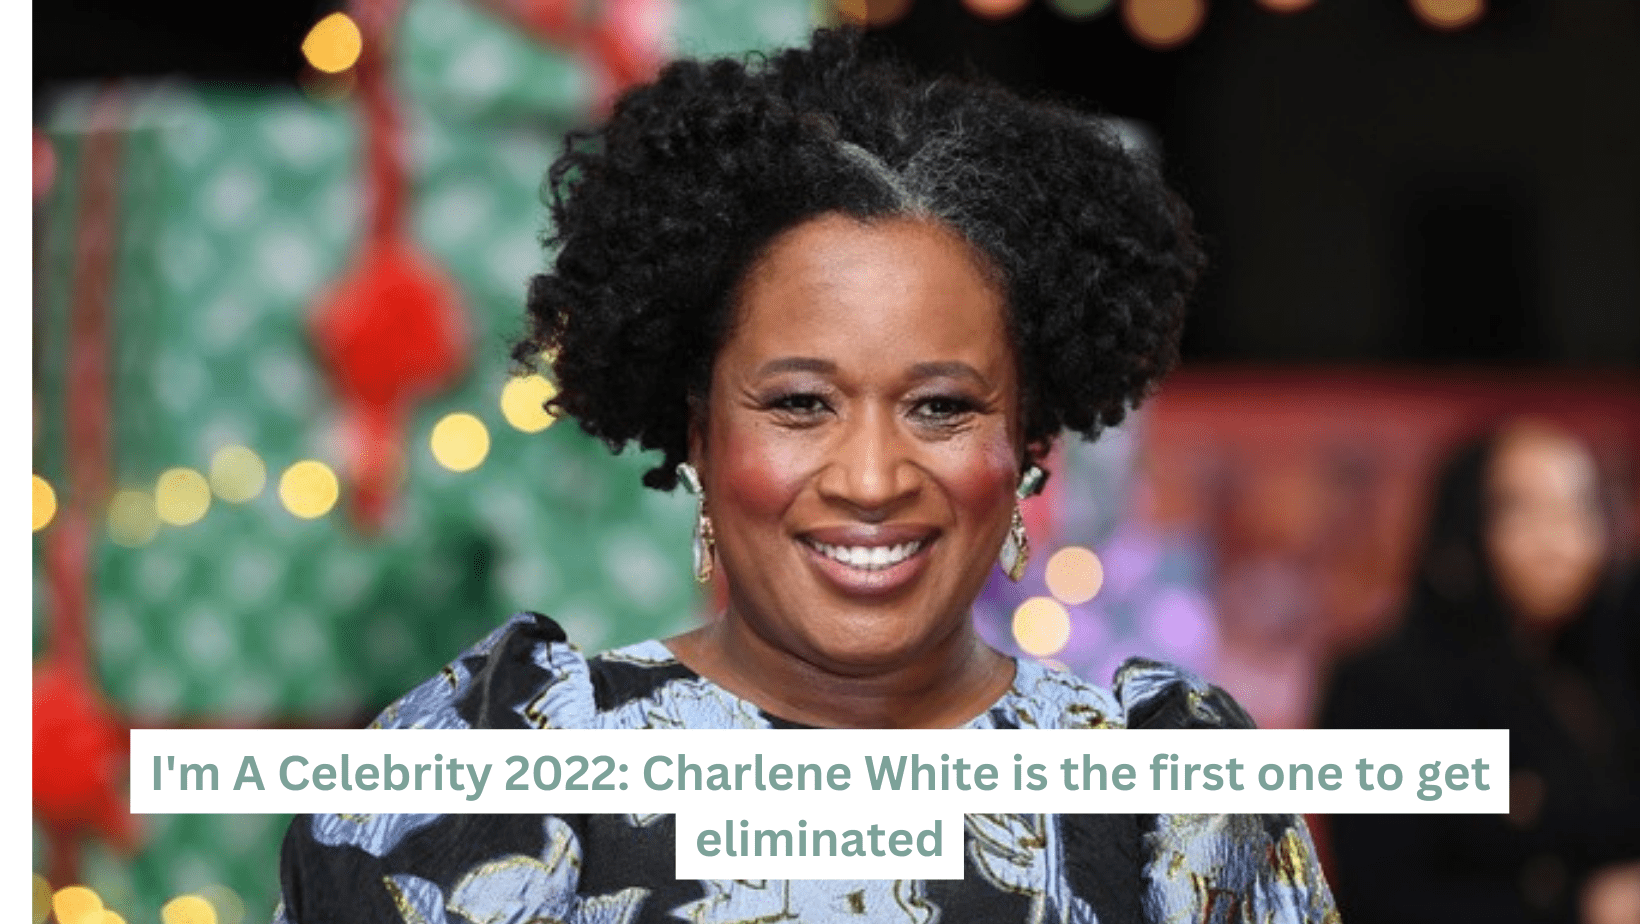 I'm A Celebrity 2022: Charlene White is the first one to get eliminated